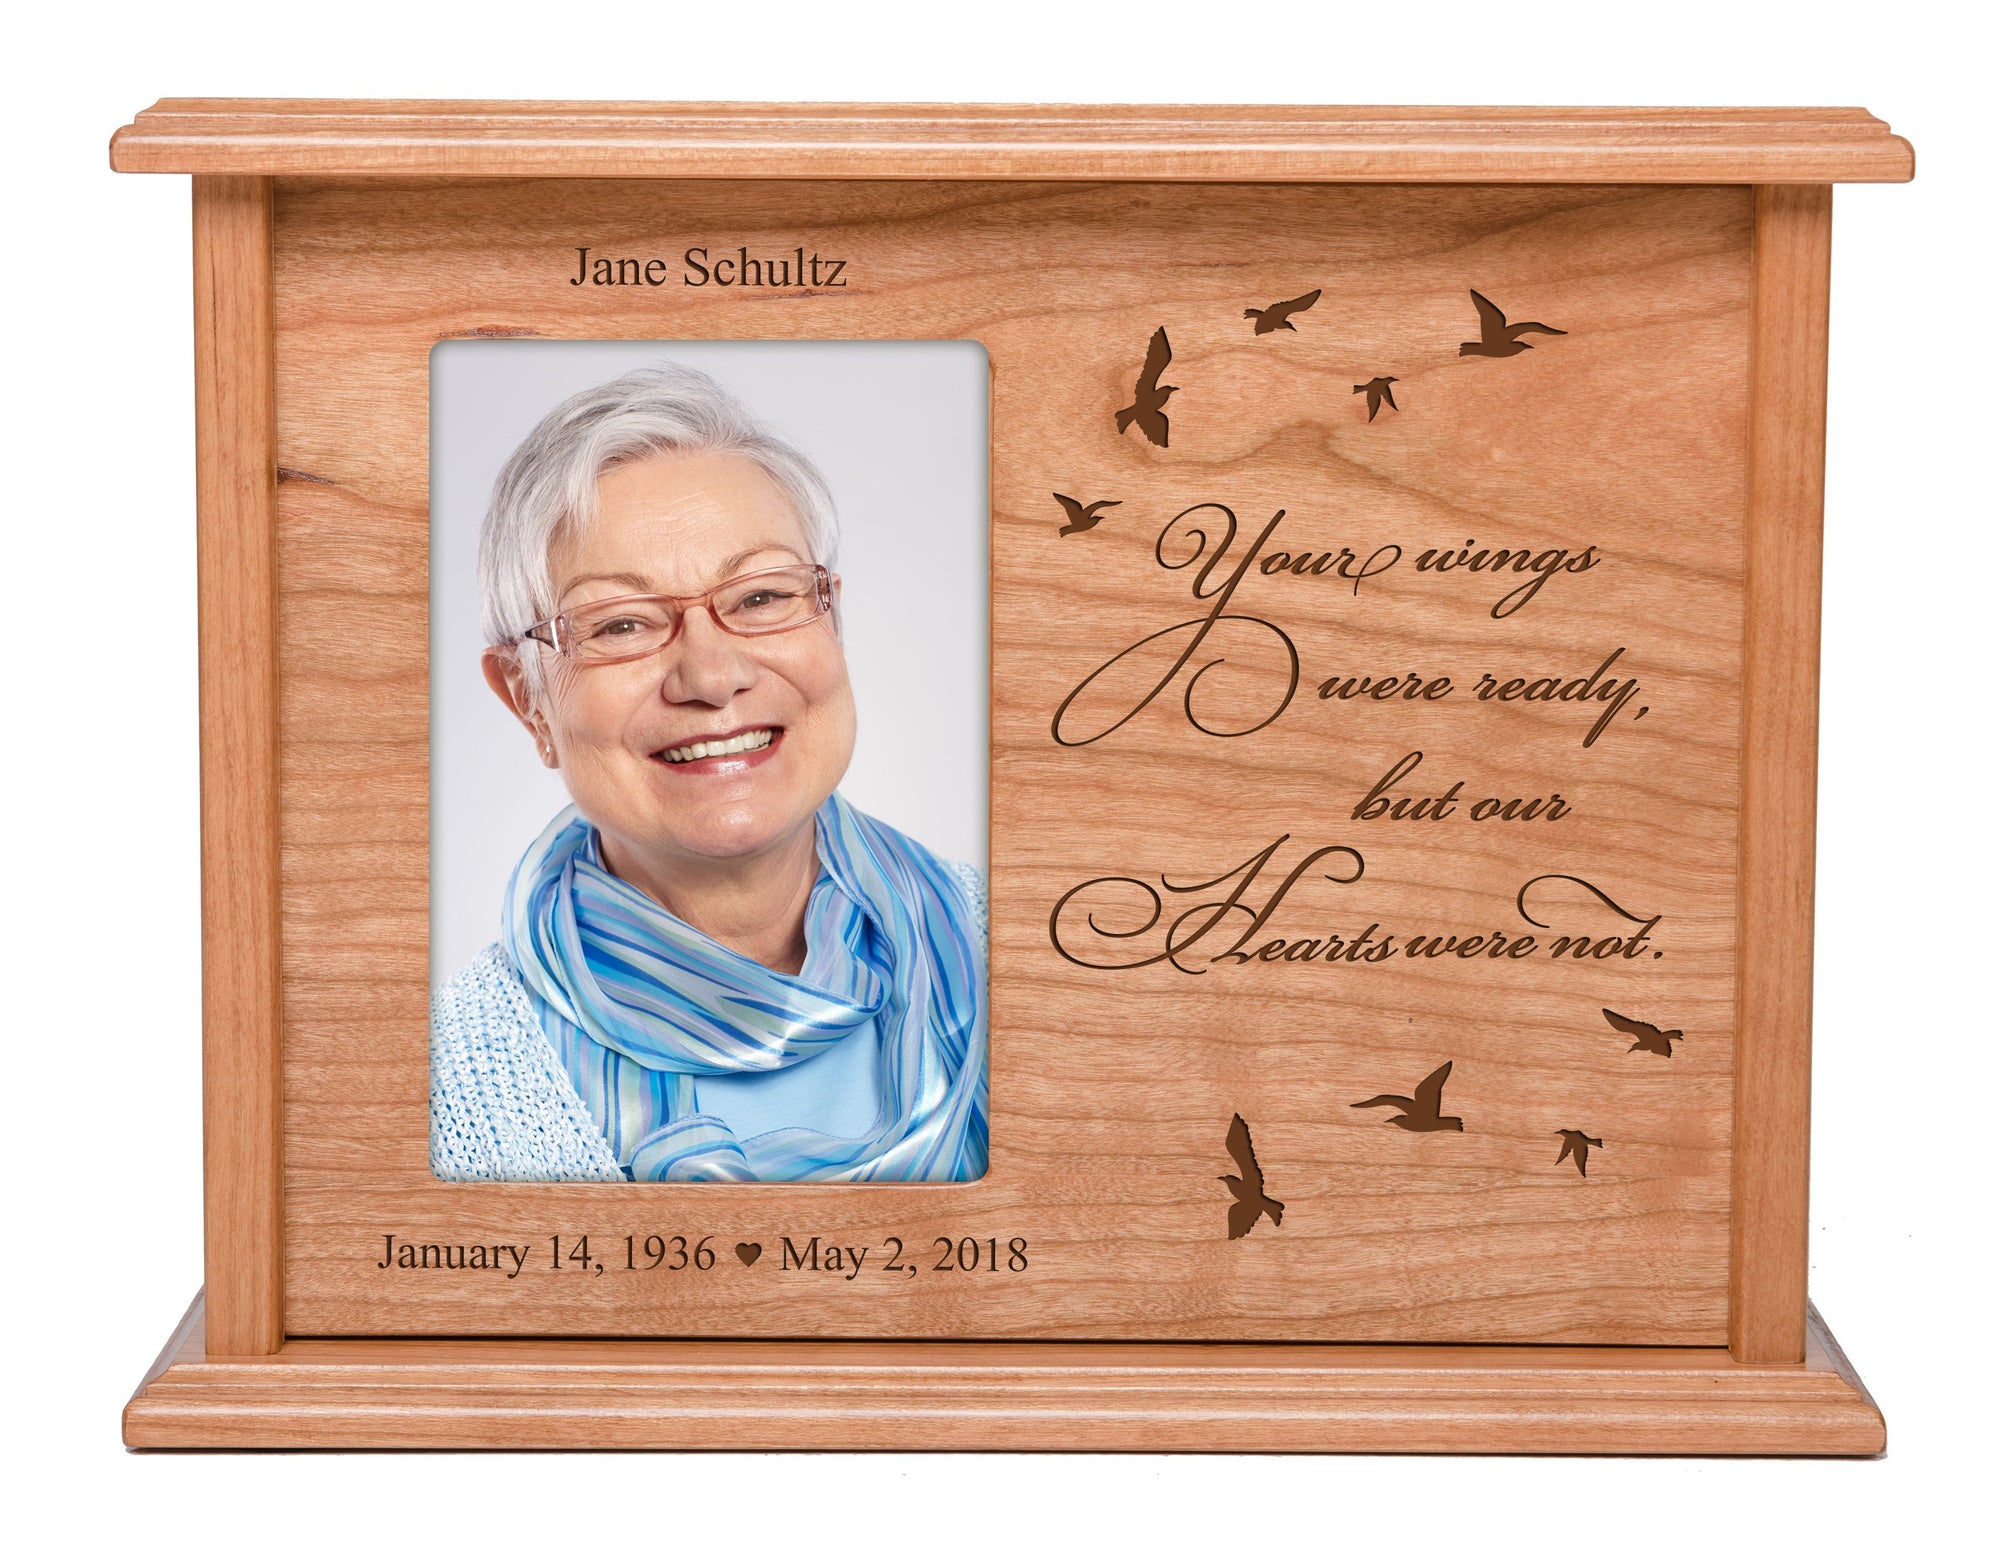 LifeSong Milestones Cremation Urns for Human Ashes Keepsake Box Your Wings Were Ready - Bereavement Urn for Adult Ashes Holds 4x6 Photo 11.75” x 9”. Sympathy Gift for the Loss of a Loved One Bereavement Gift for Family Friends Condolence Sympathy Comfort Keepsake Funeral Decoration. Cremation Urns, urn for ashes, urns for humans, urns for dad, urns for mom, urns for sale, urns for human ashes, pet urns, cherished urns, small urns, small urns for ashes.